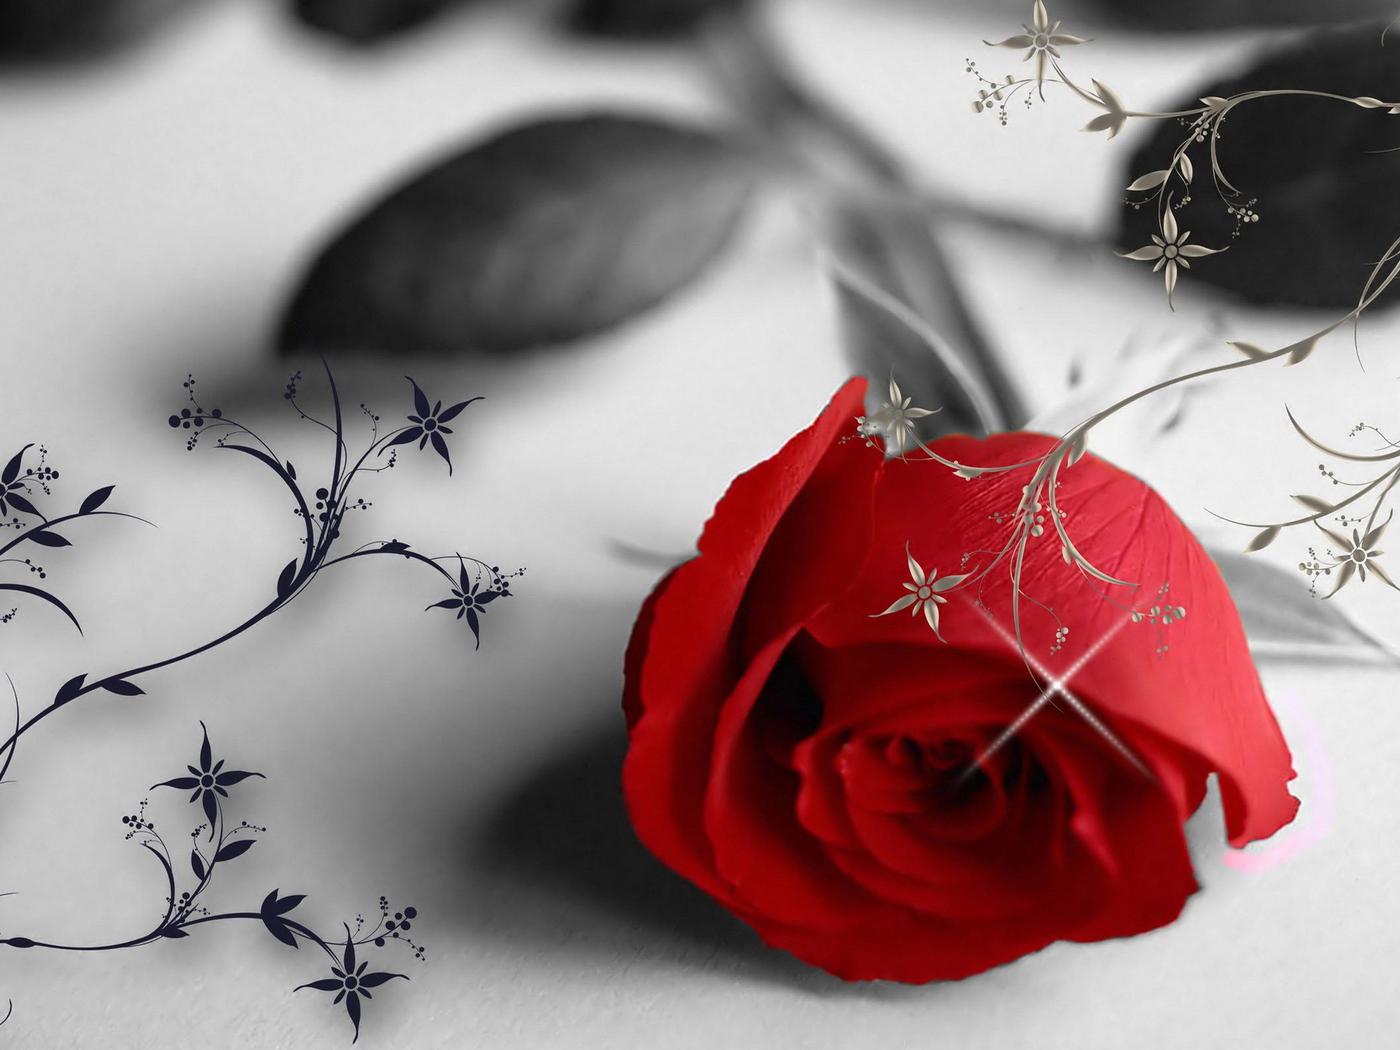 Red rose in a black and white wallpaper - love moments